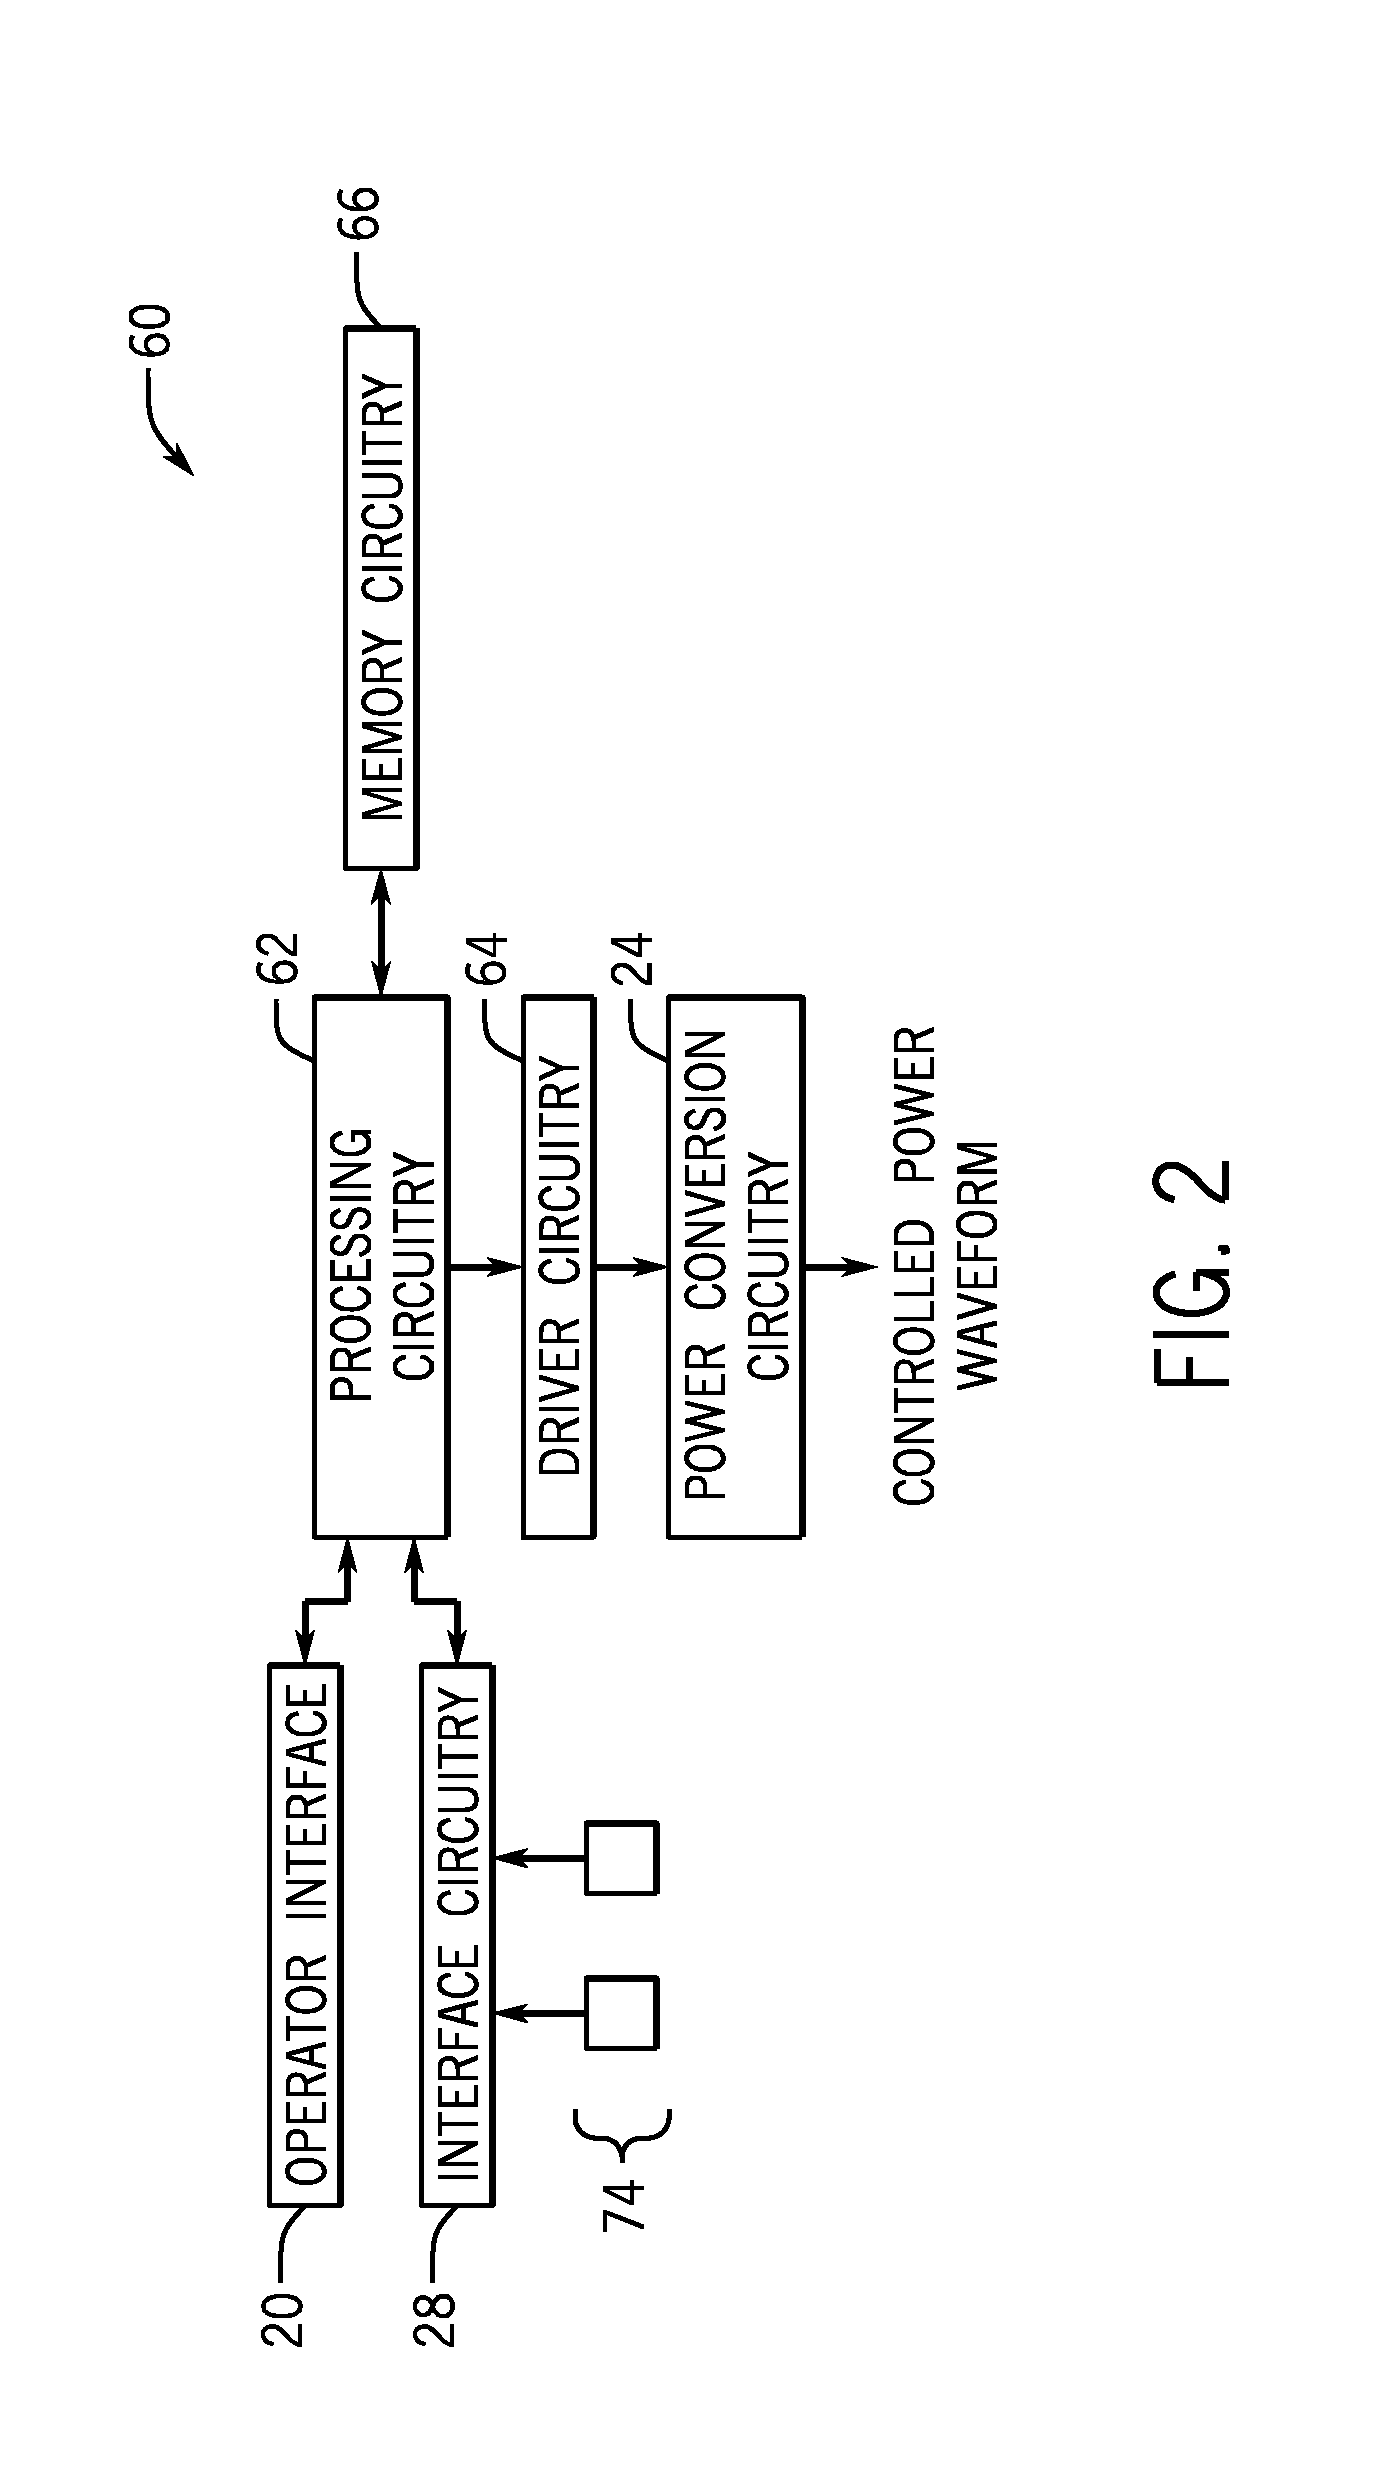 Controlled short circuit welding system and method